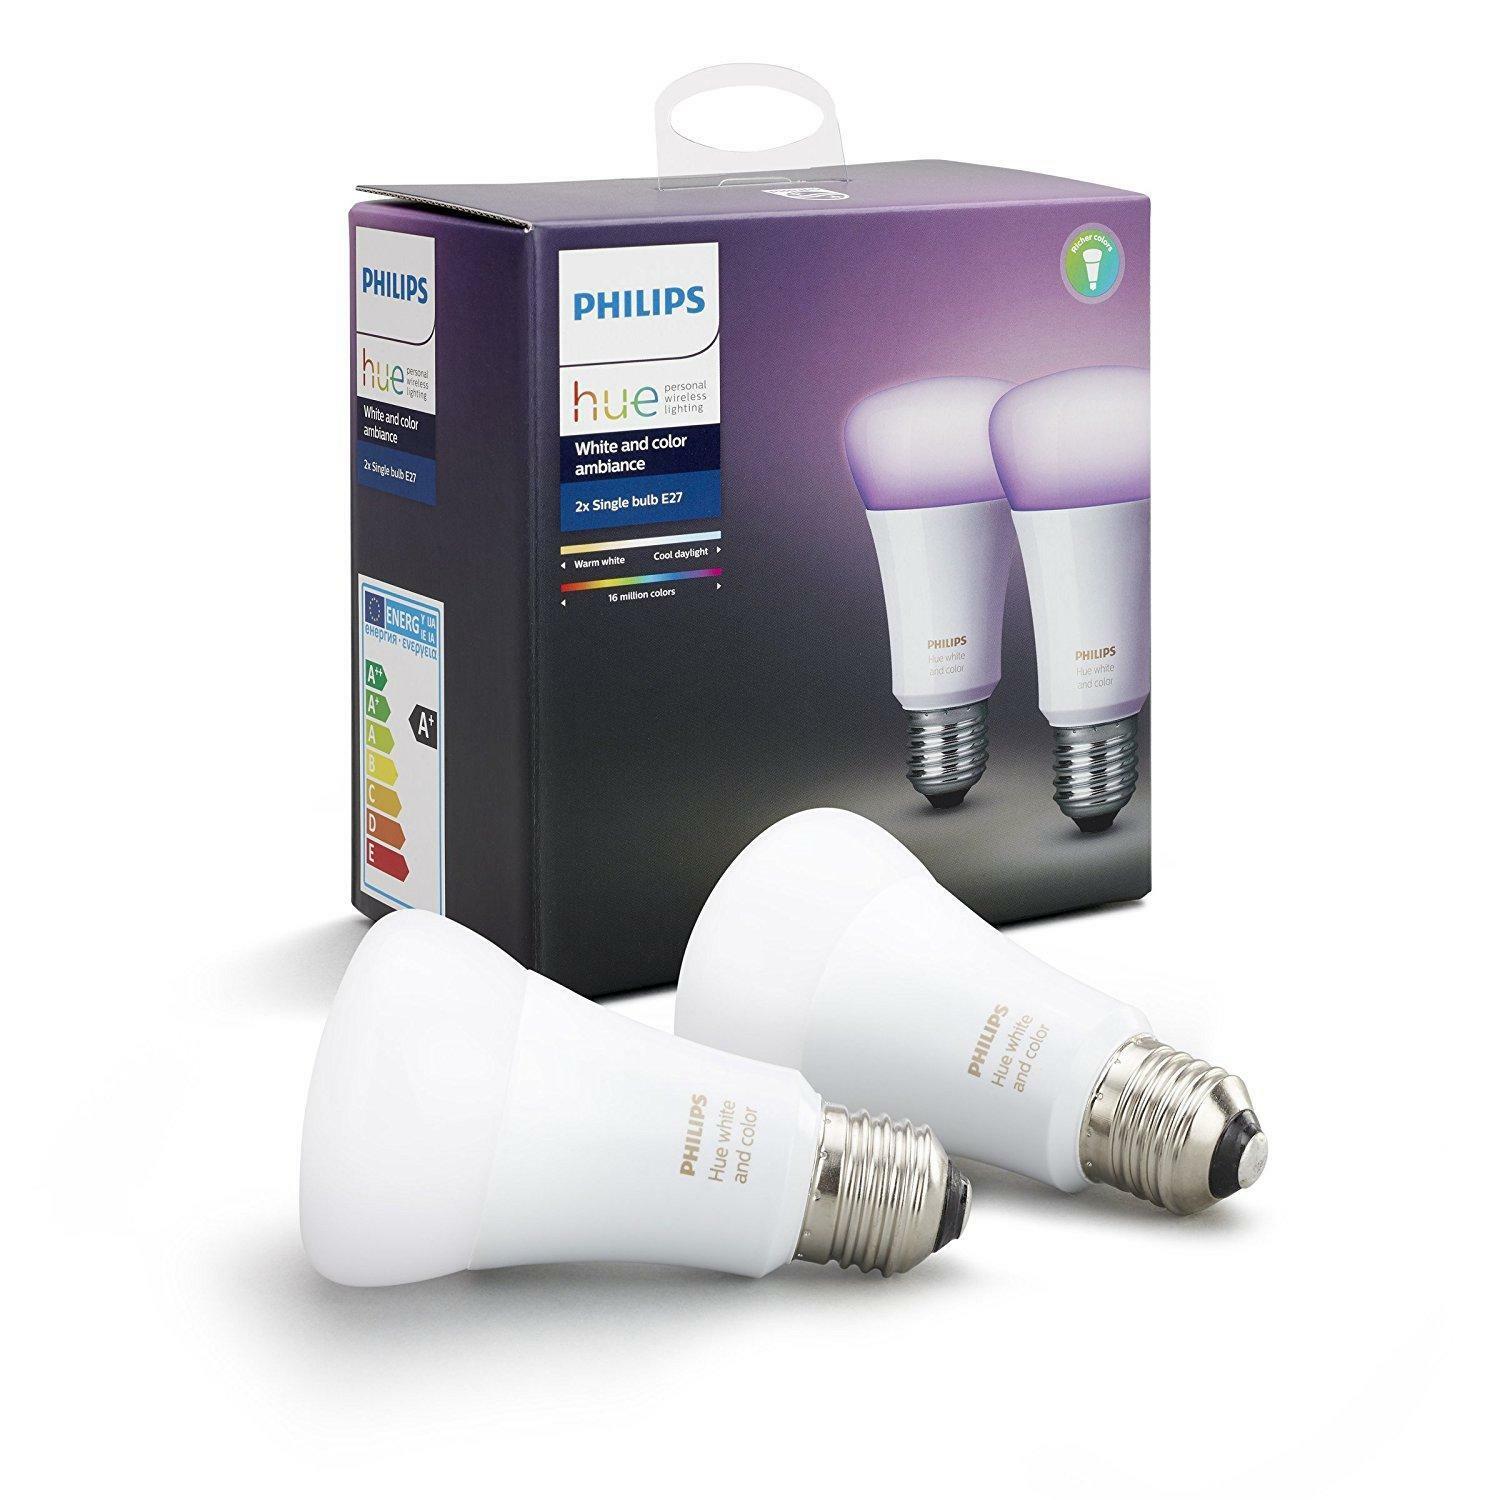 PHILIPS PHILIPS HUE WHITE AND COLOR AMBIANCE 2 LAMPADINE LED E27 72905200